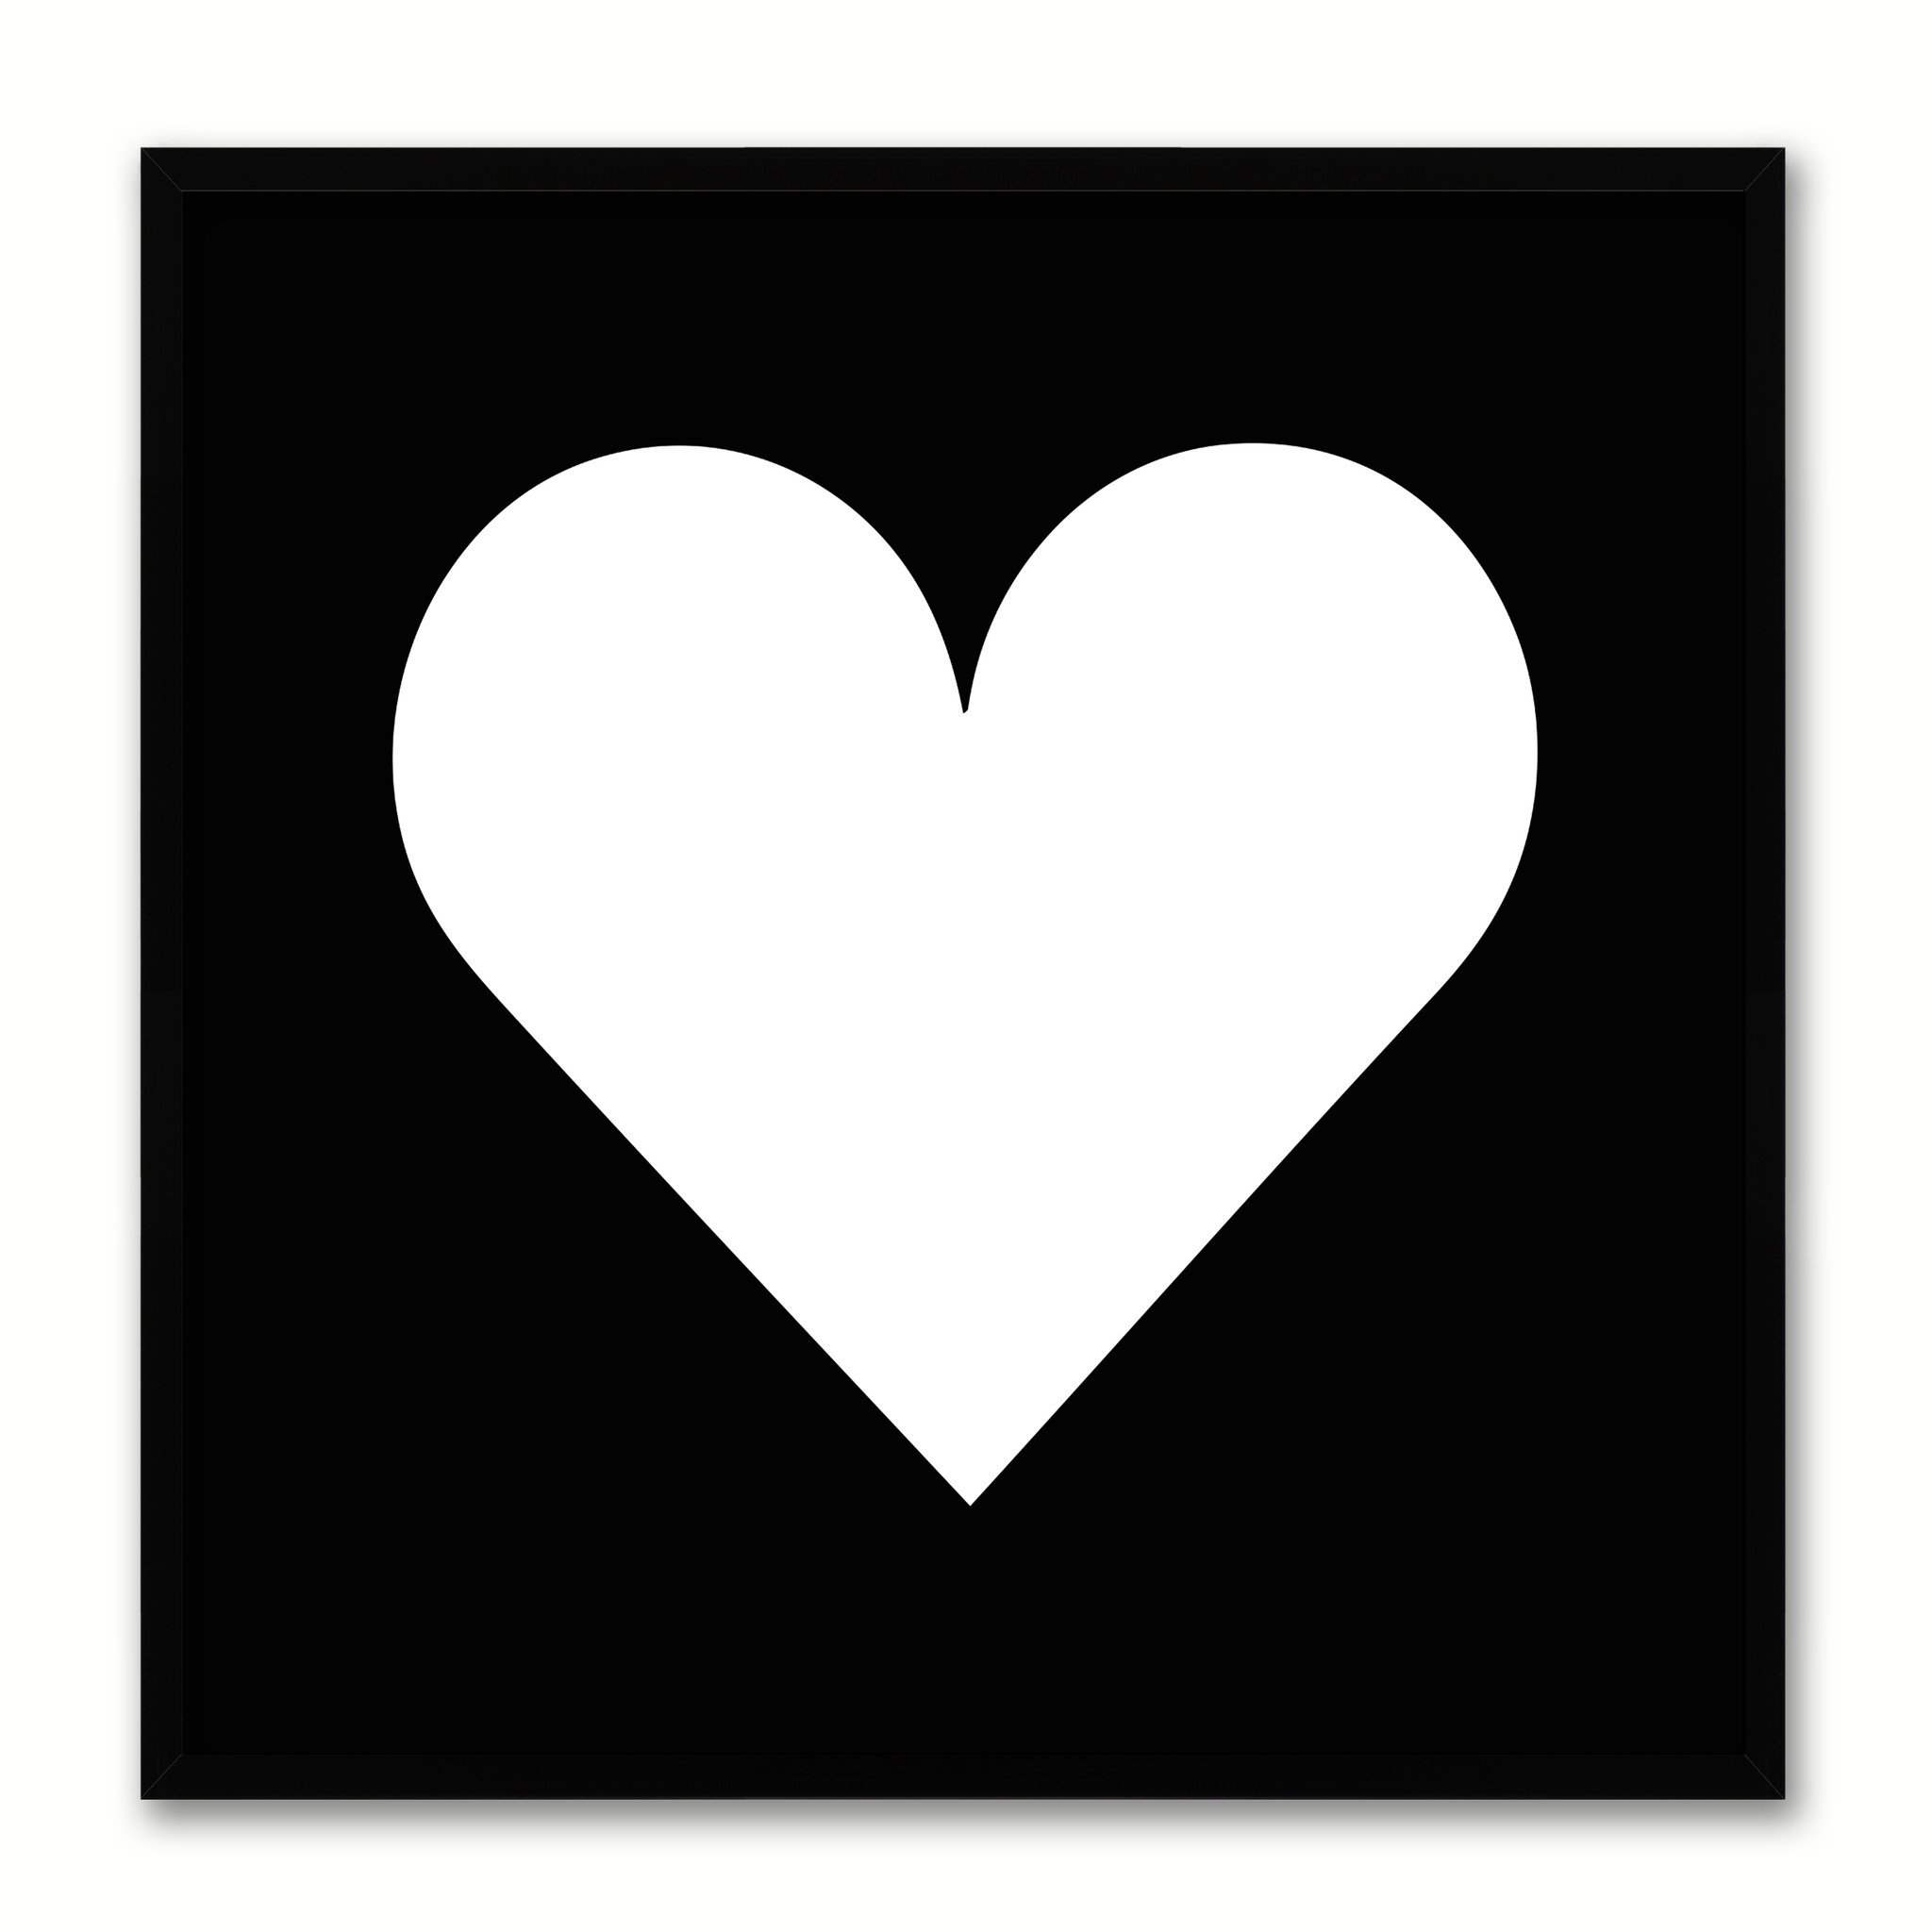 Home-is-where-the-heart-is icons | Noun Project